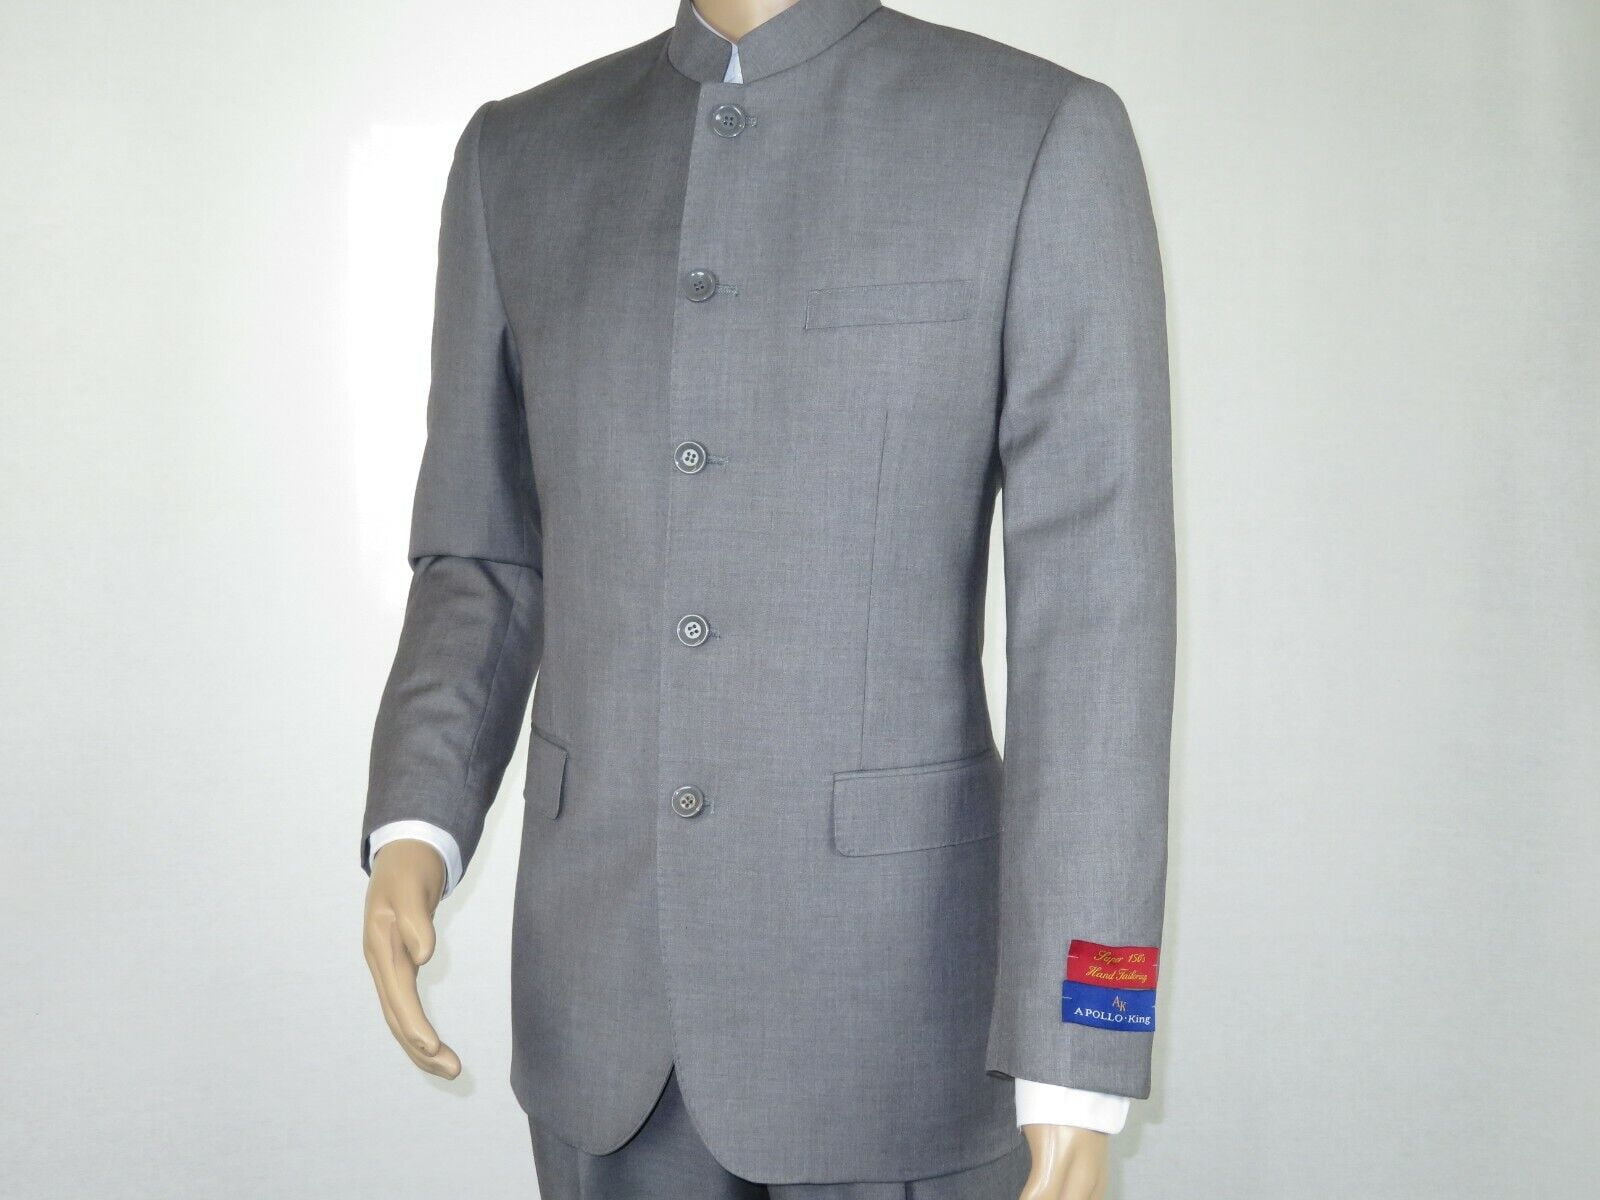 Apollo-King Ag91 Mandarin Men's Suit Jet Black perfect for Church is  Single Breasted Suit with 9 button closure in 3 button spaced pattern. The  No Collar Suit has epaulet strap on the